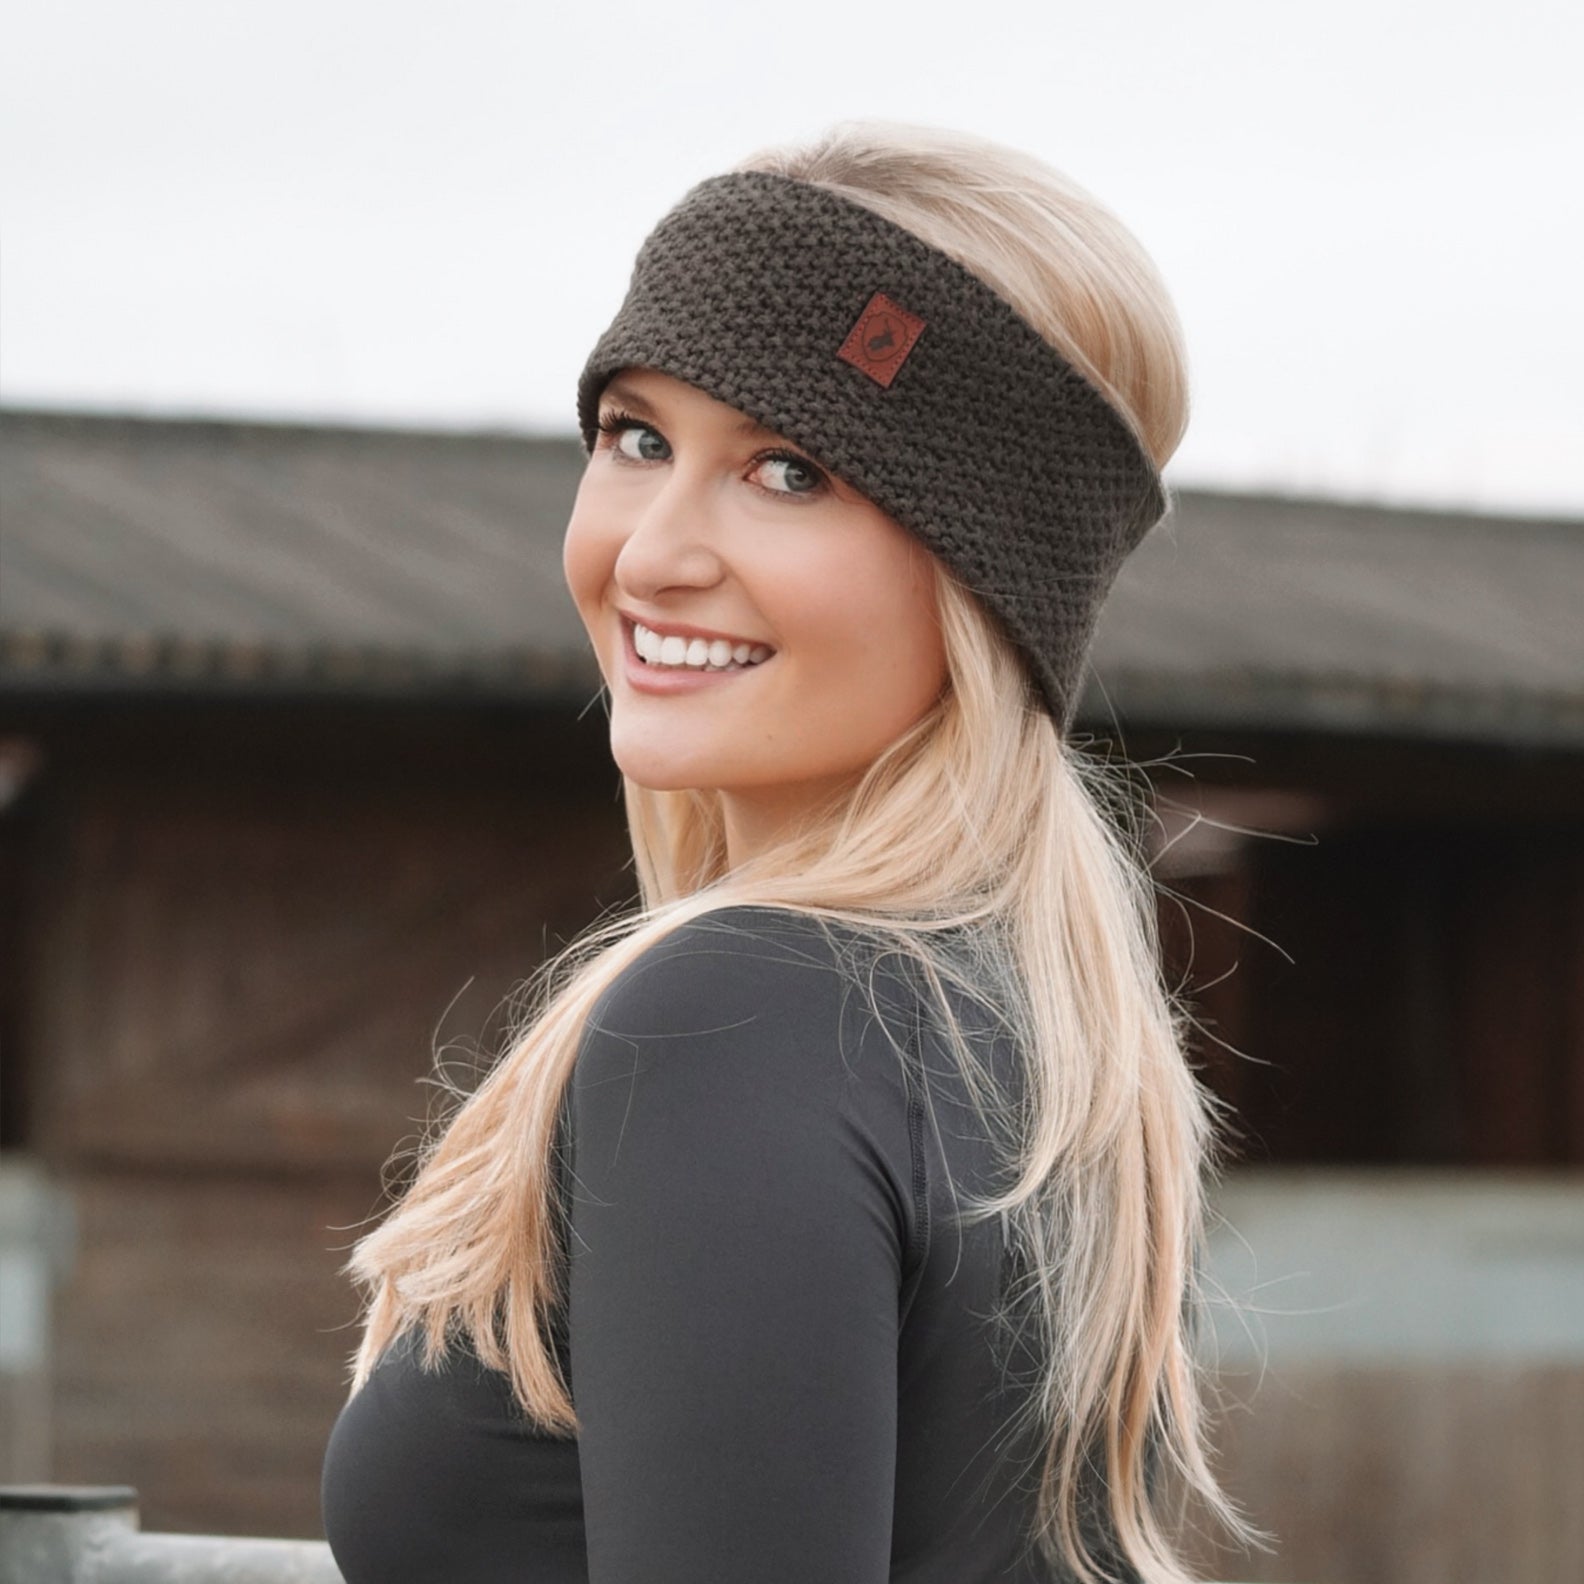 New-Forest-Ladies-Knitted-Headband